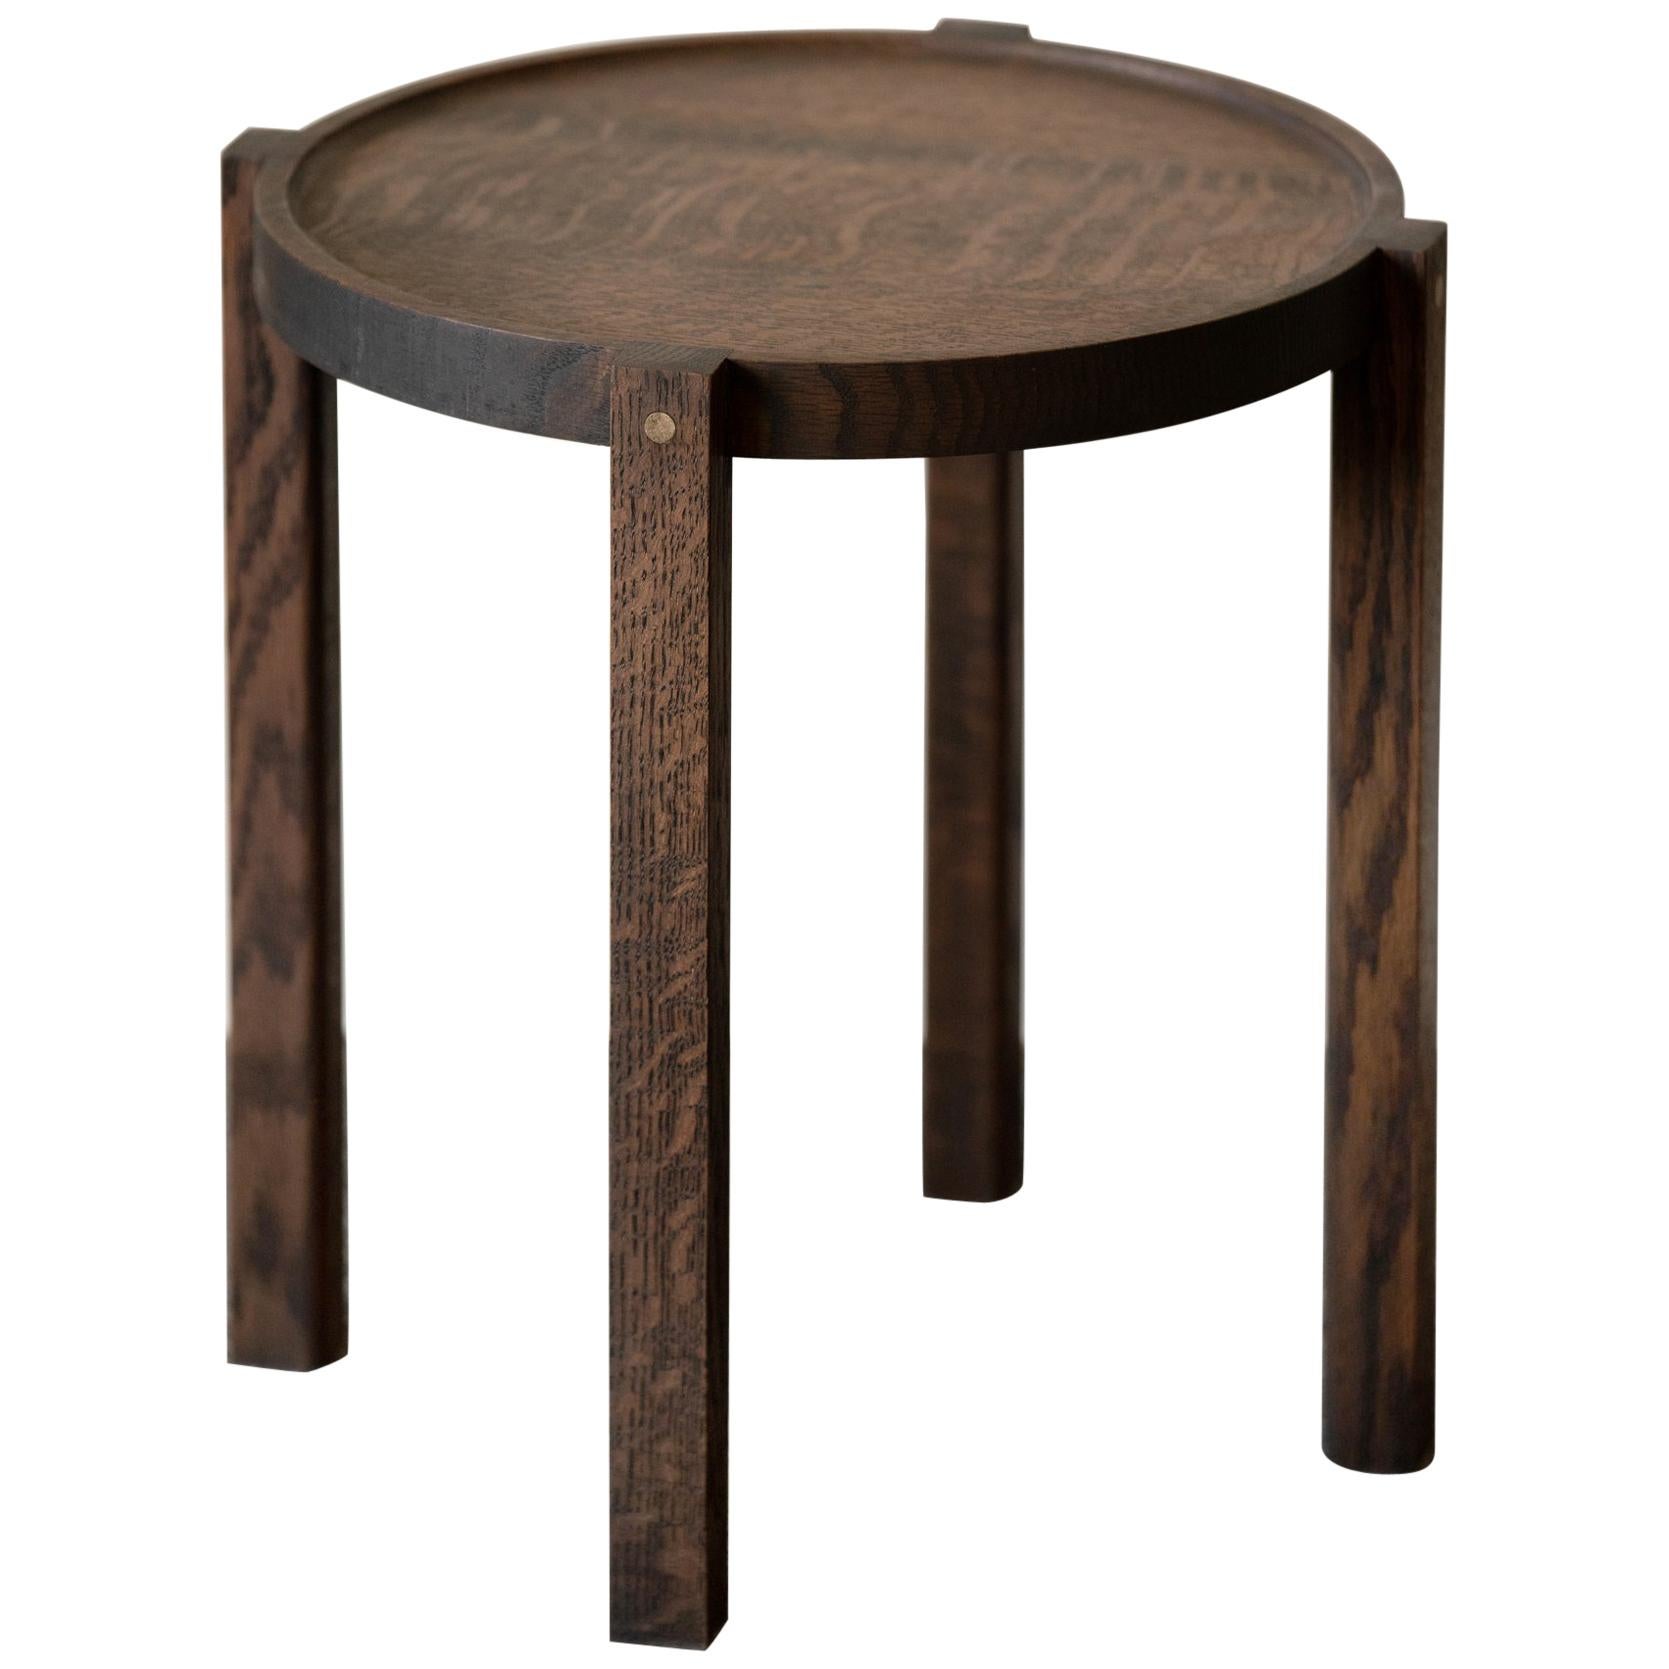 Round Wood Side Table Black Color White Oak with Brass Details